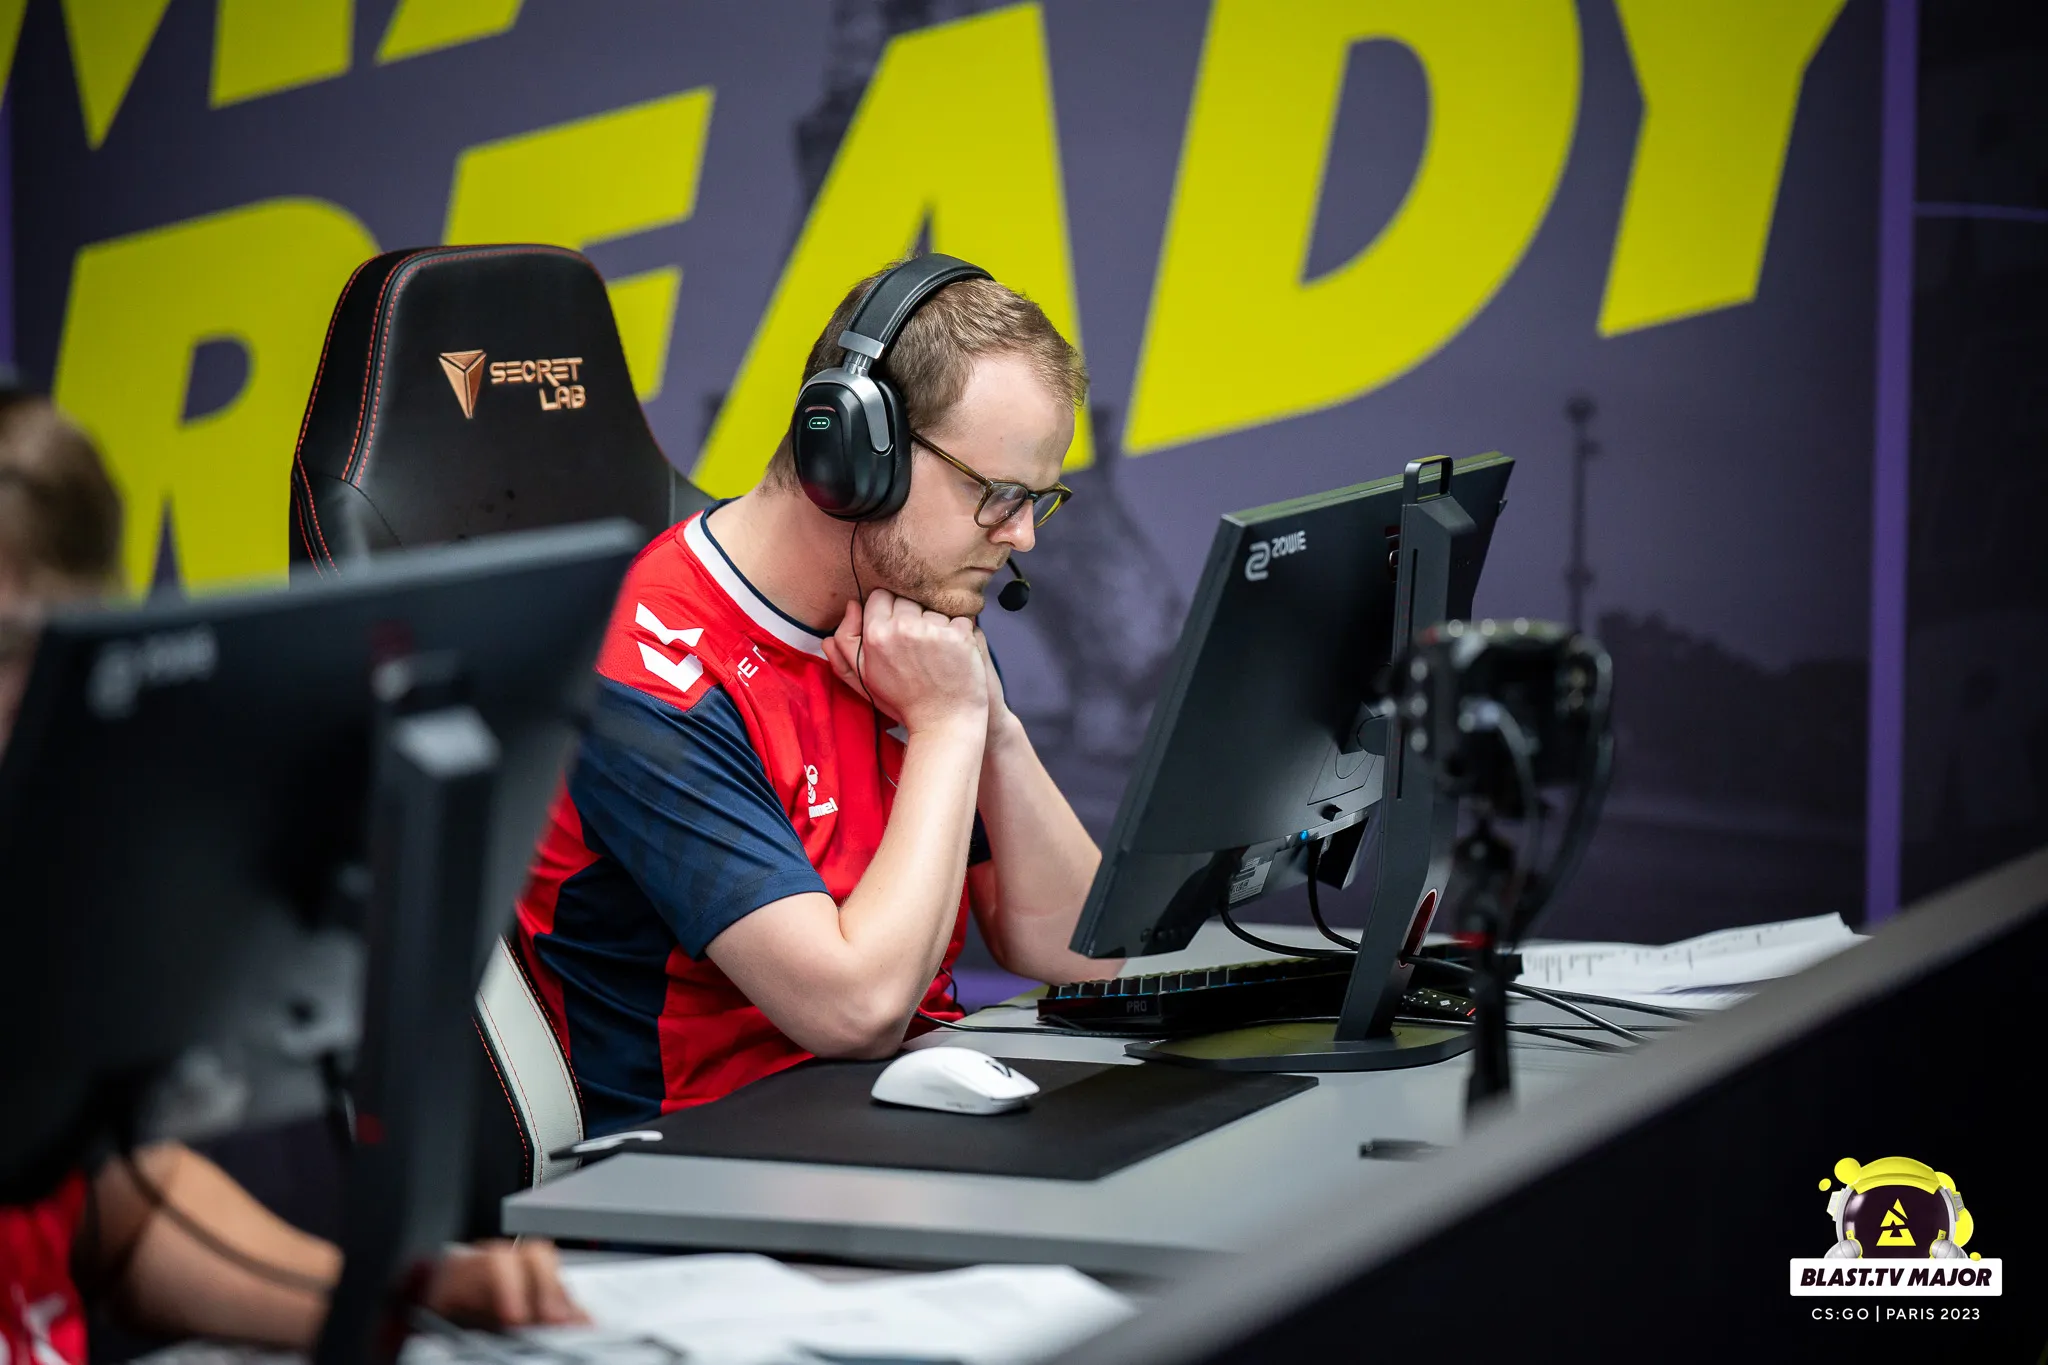 Astralis CSGO replaces 4-time Major champion with rookie